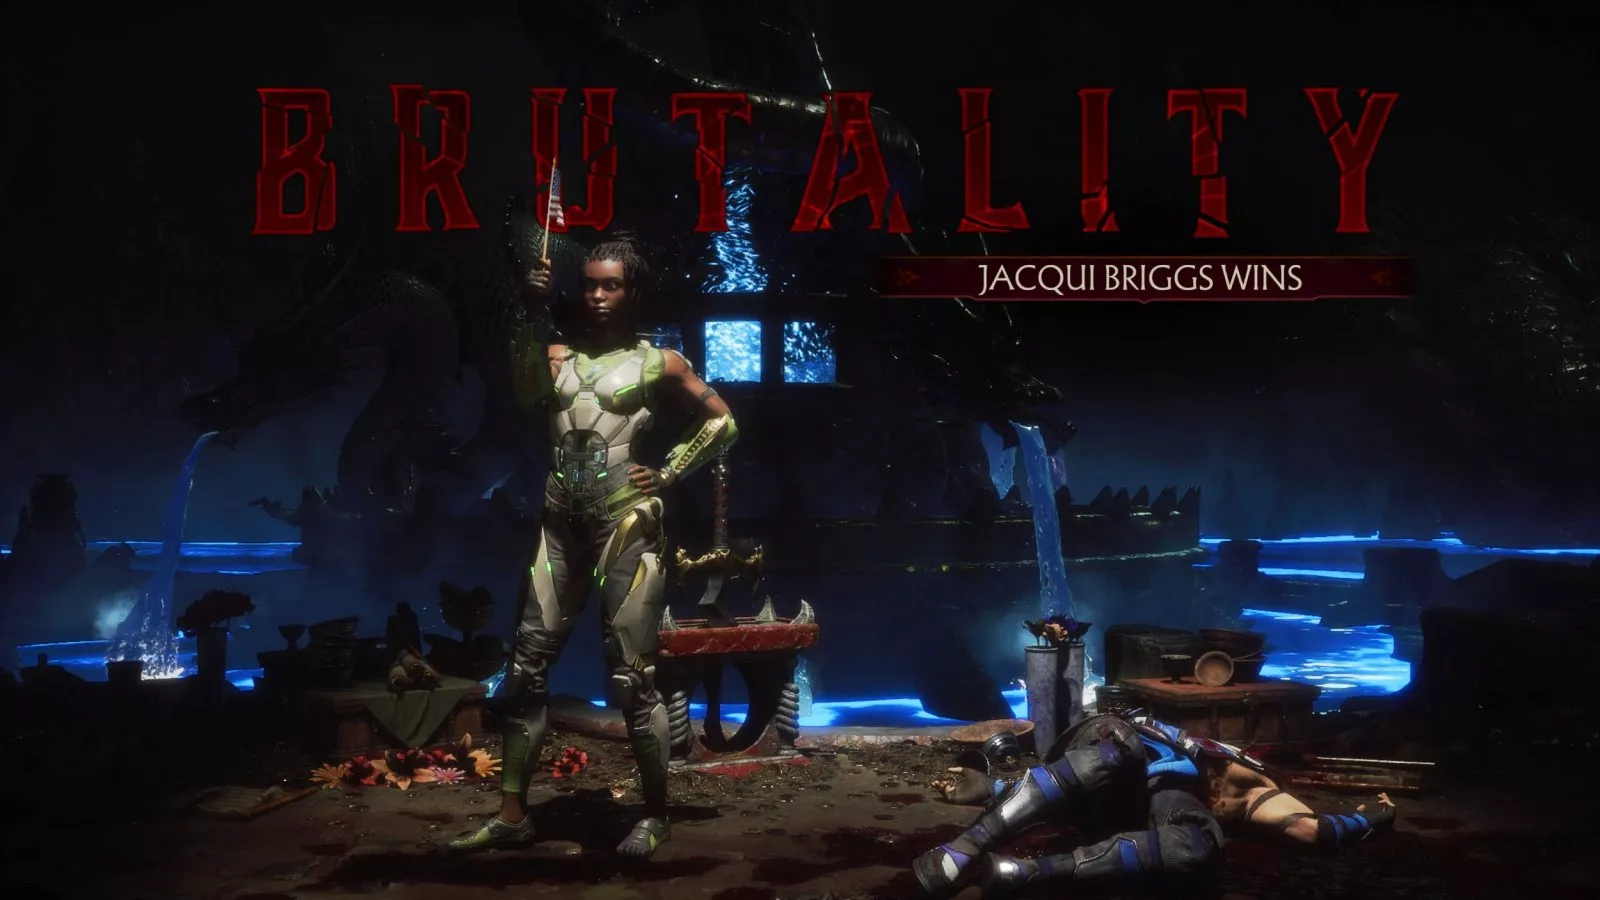 Here's the List of Fatalities in Mortal Kombat 4! Kill Opponents with  Deadly Moves!